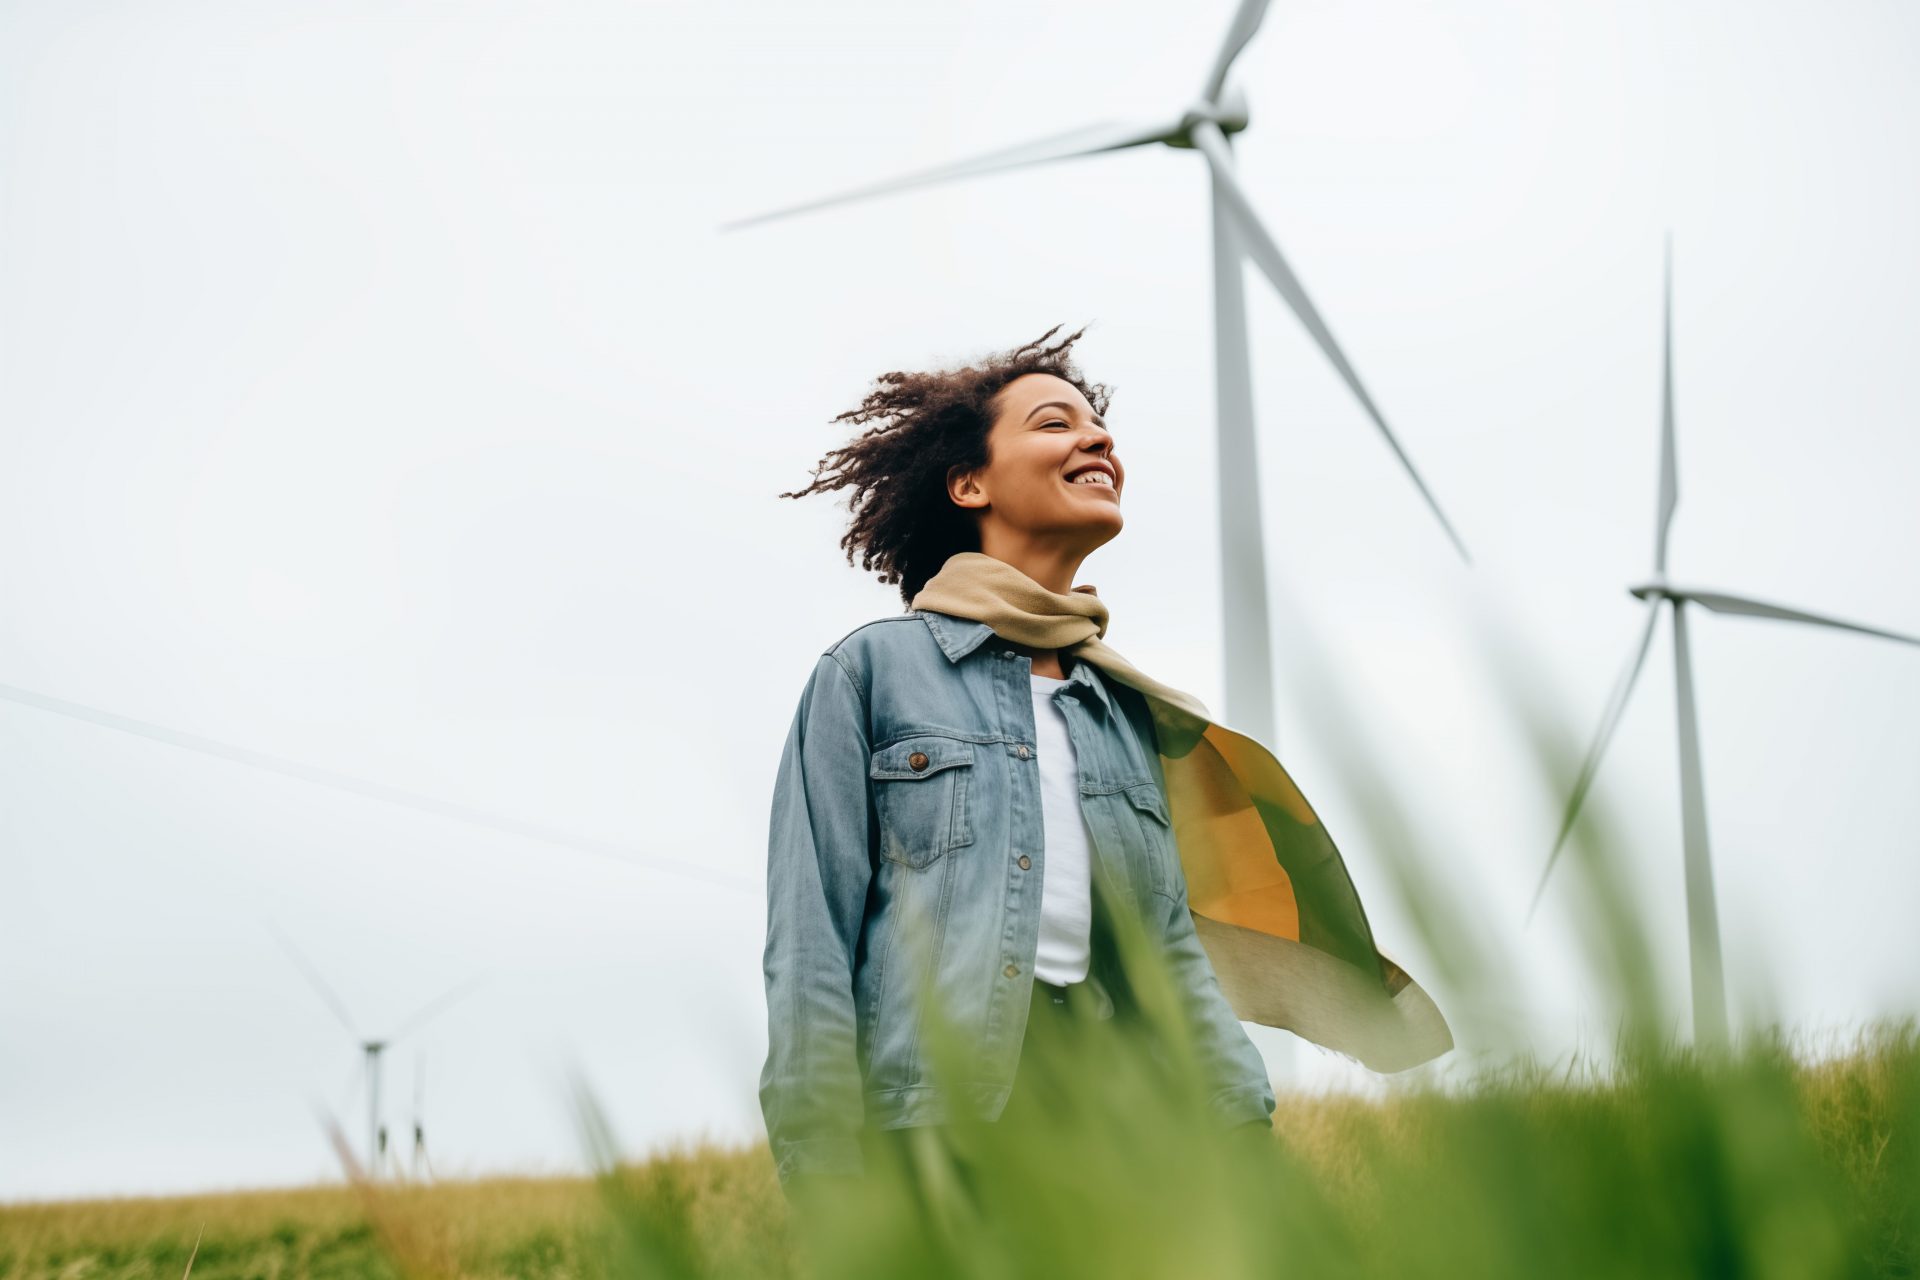 A young woman stands in a wind farm, the wind blowing her scarf around her shoulders and into her hair, several wind turbines in the background.